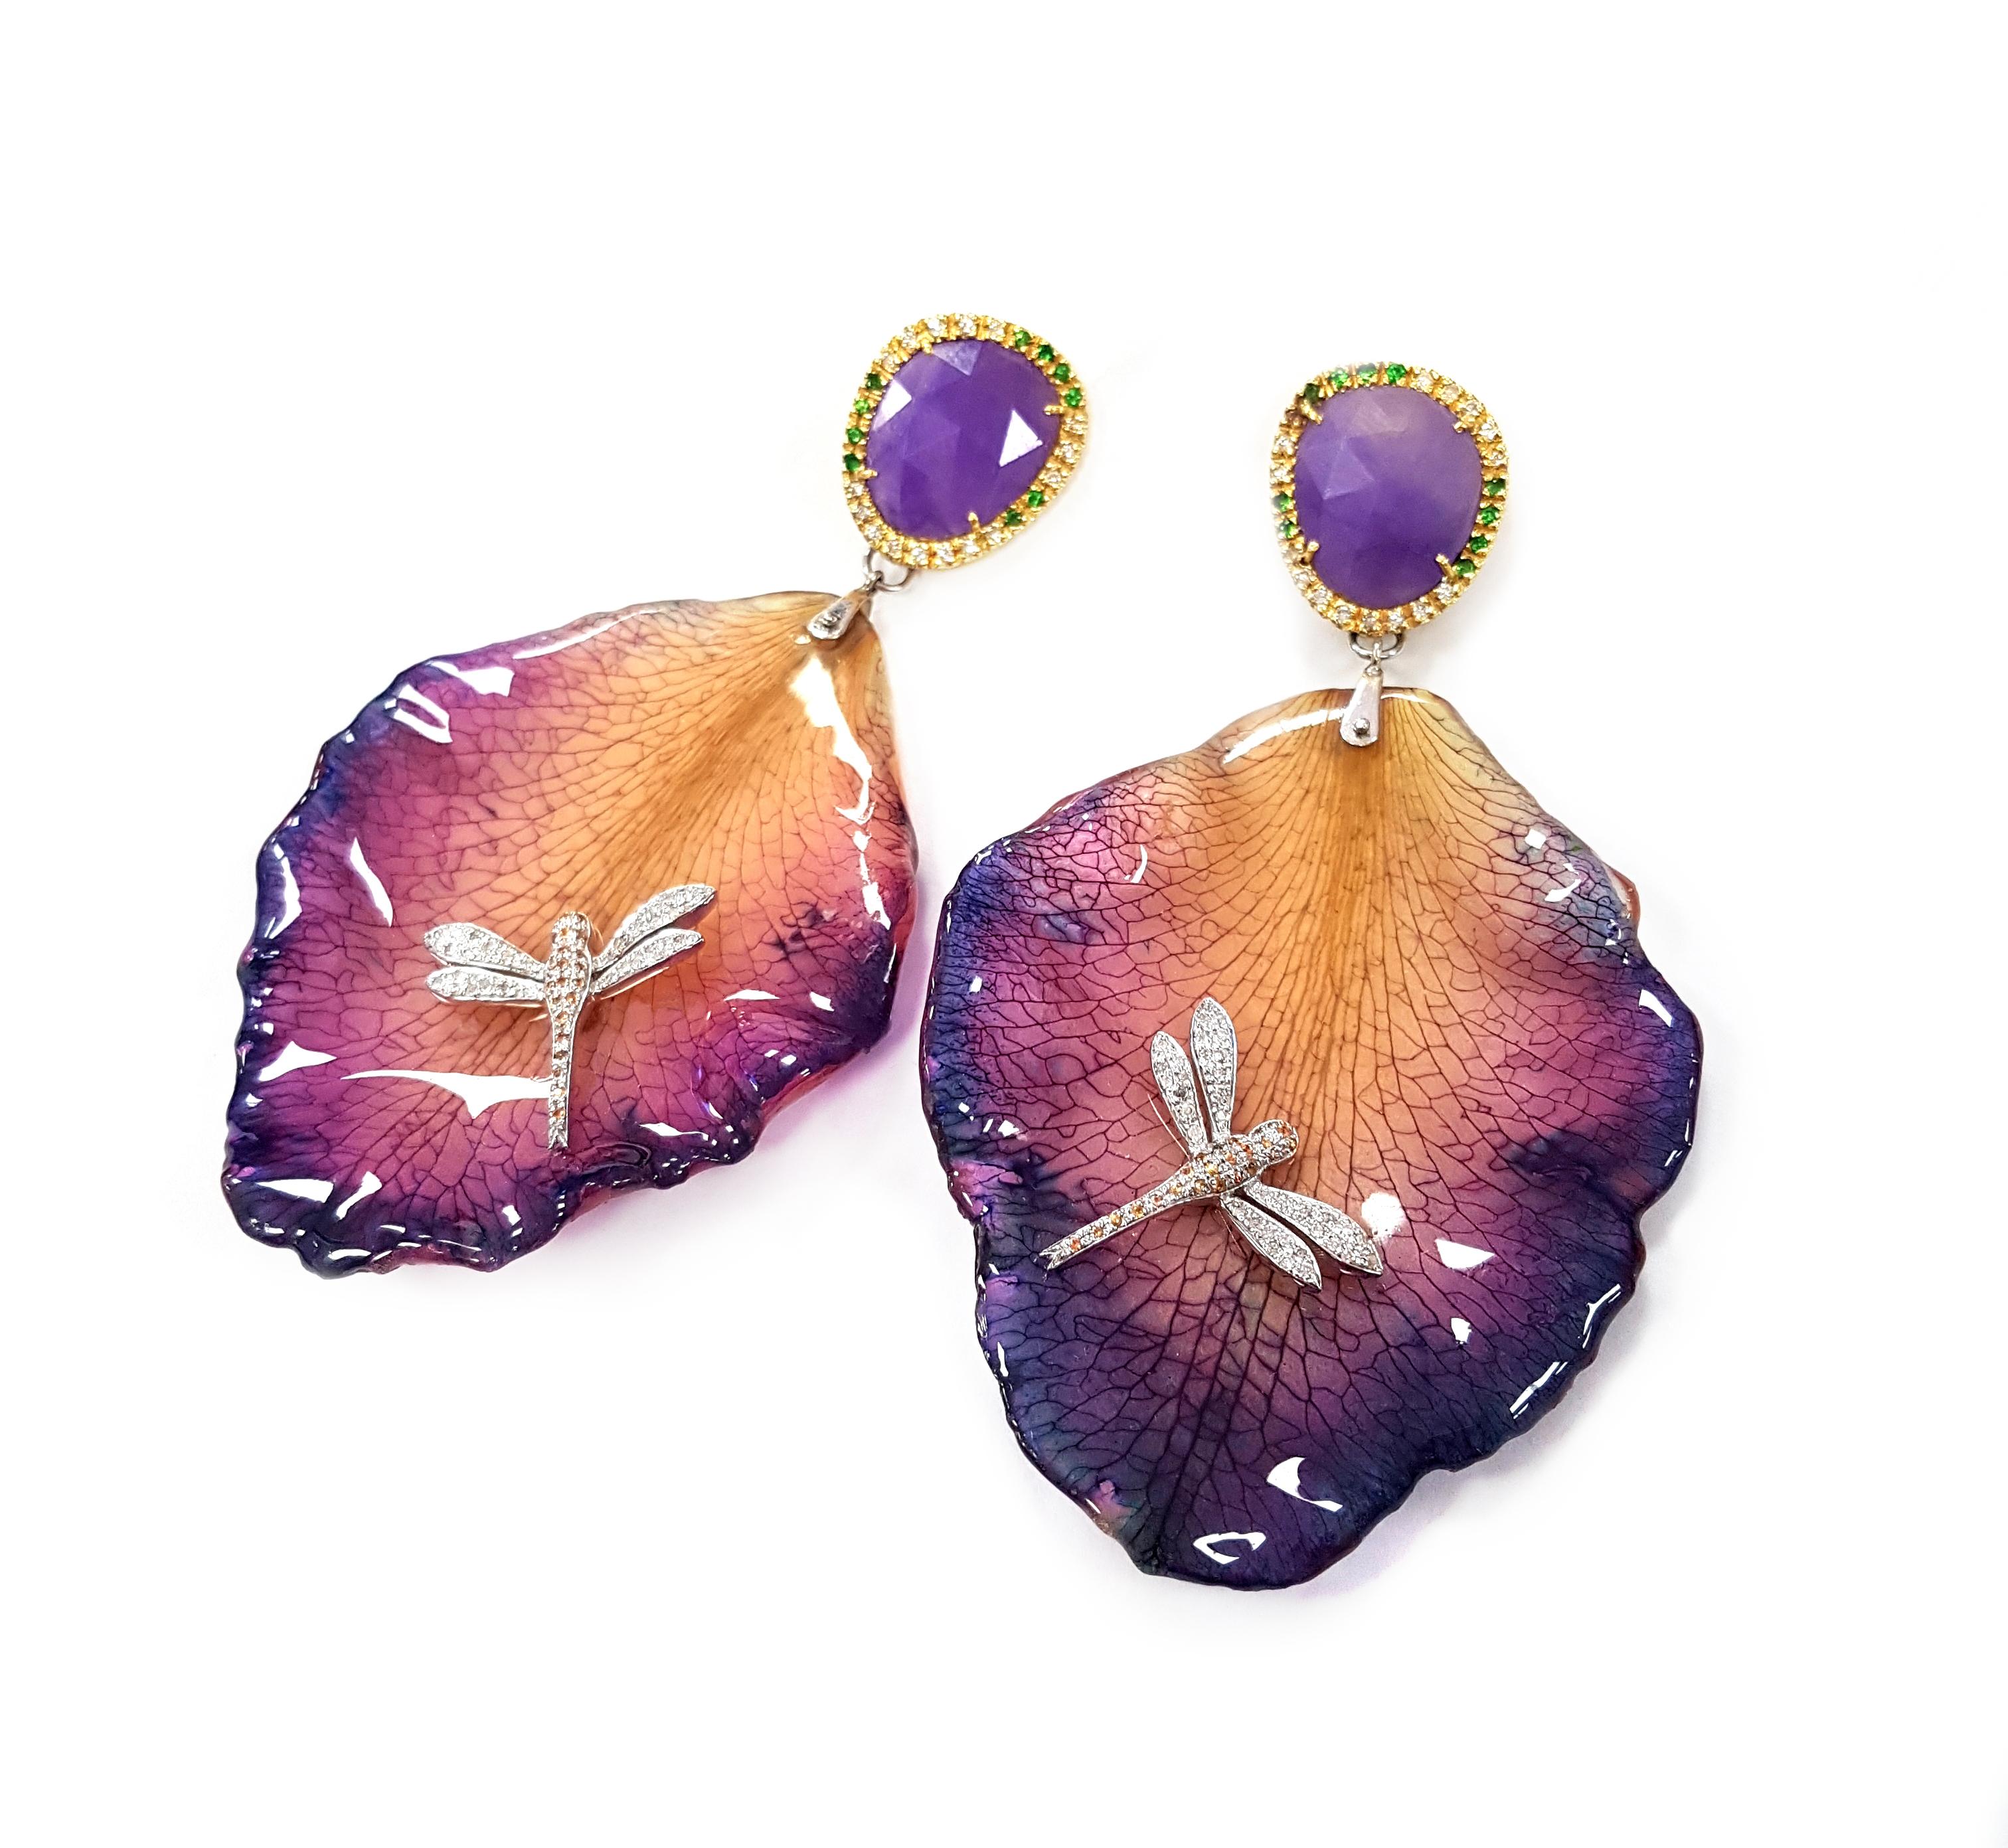 A vibrant pair of floral earrings masterfully created entirely by hand. Each earring features a perfect petal from a real orchid, which has been transformed to preserve its beauty for eternity. The orchid petals are approximately 4.7 centimetres